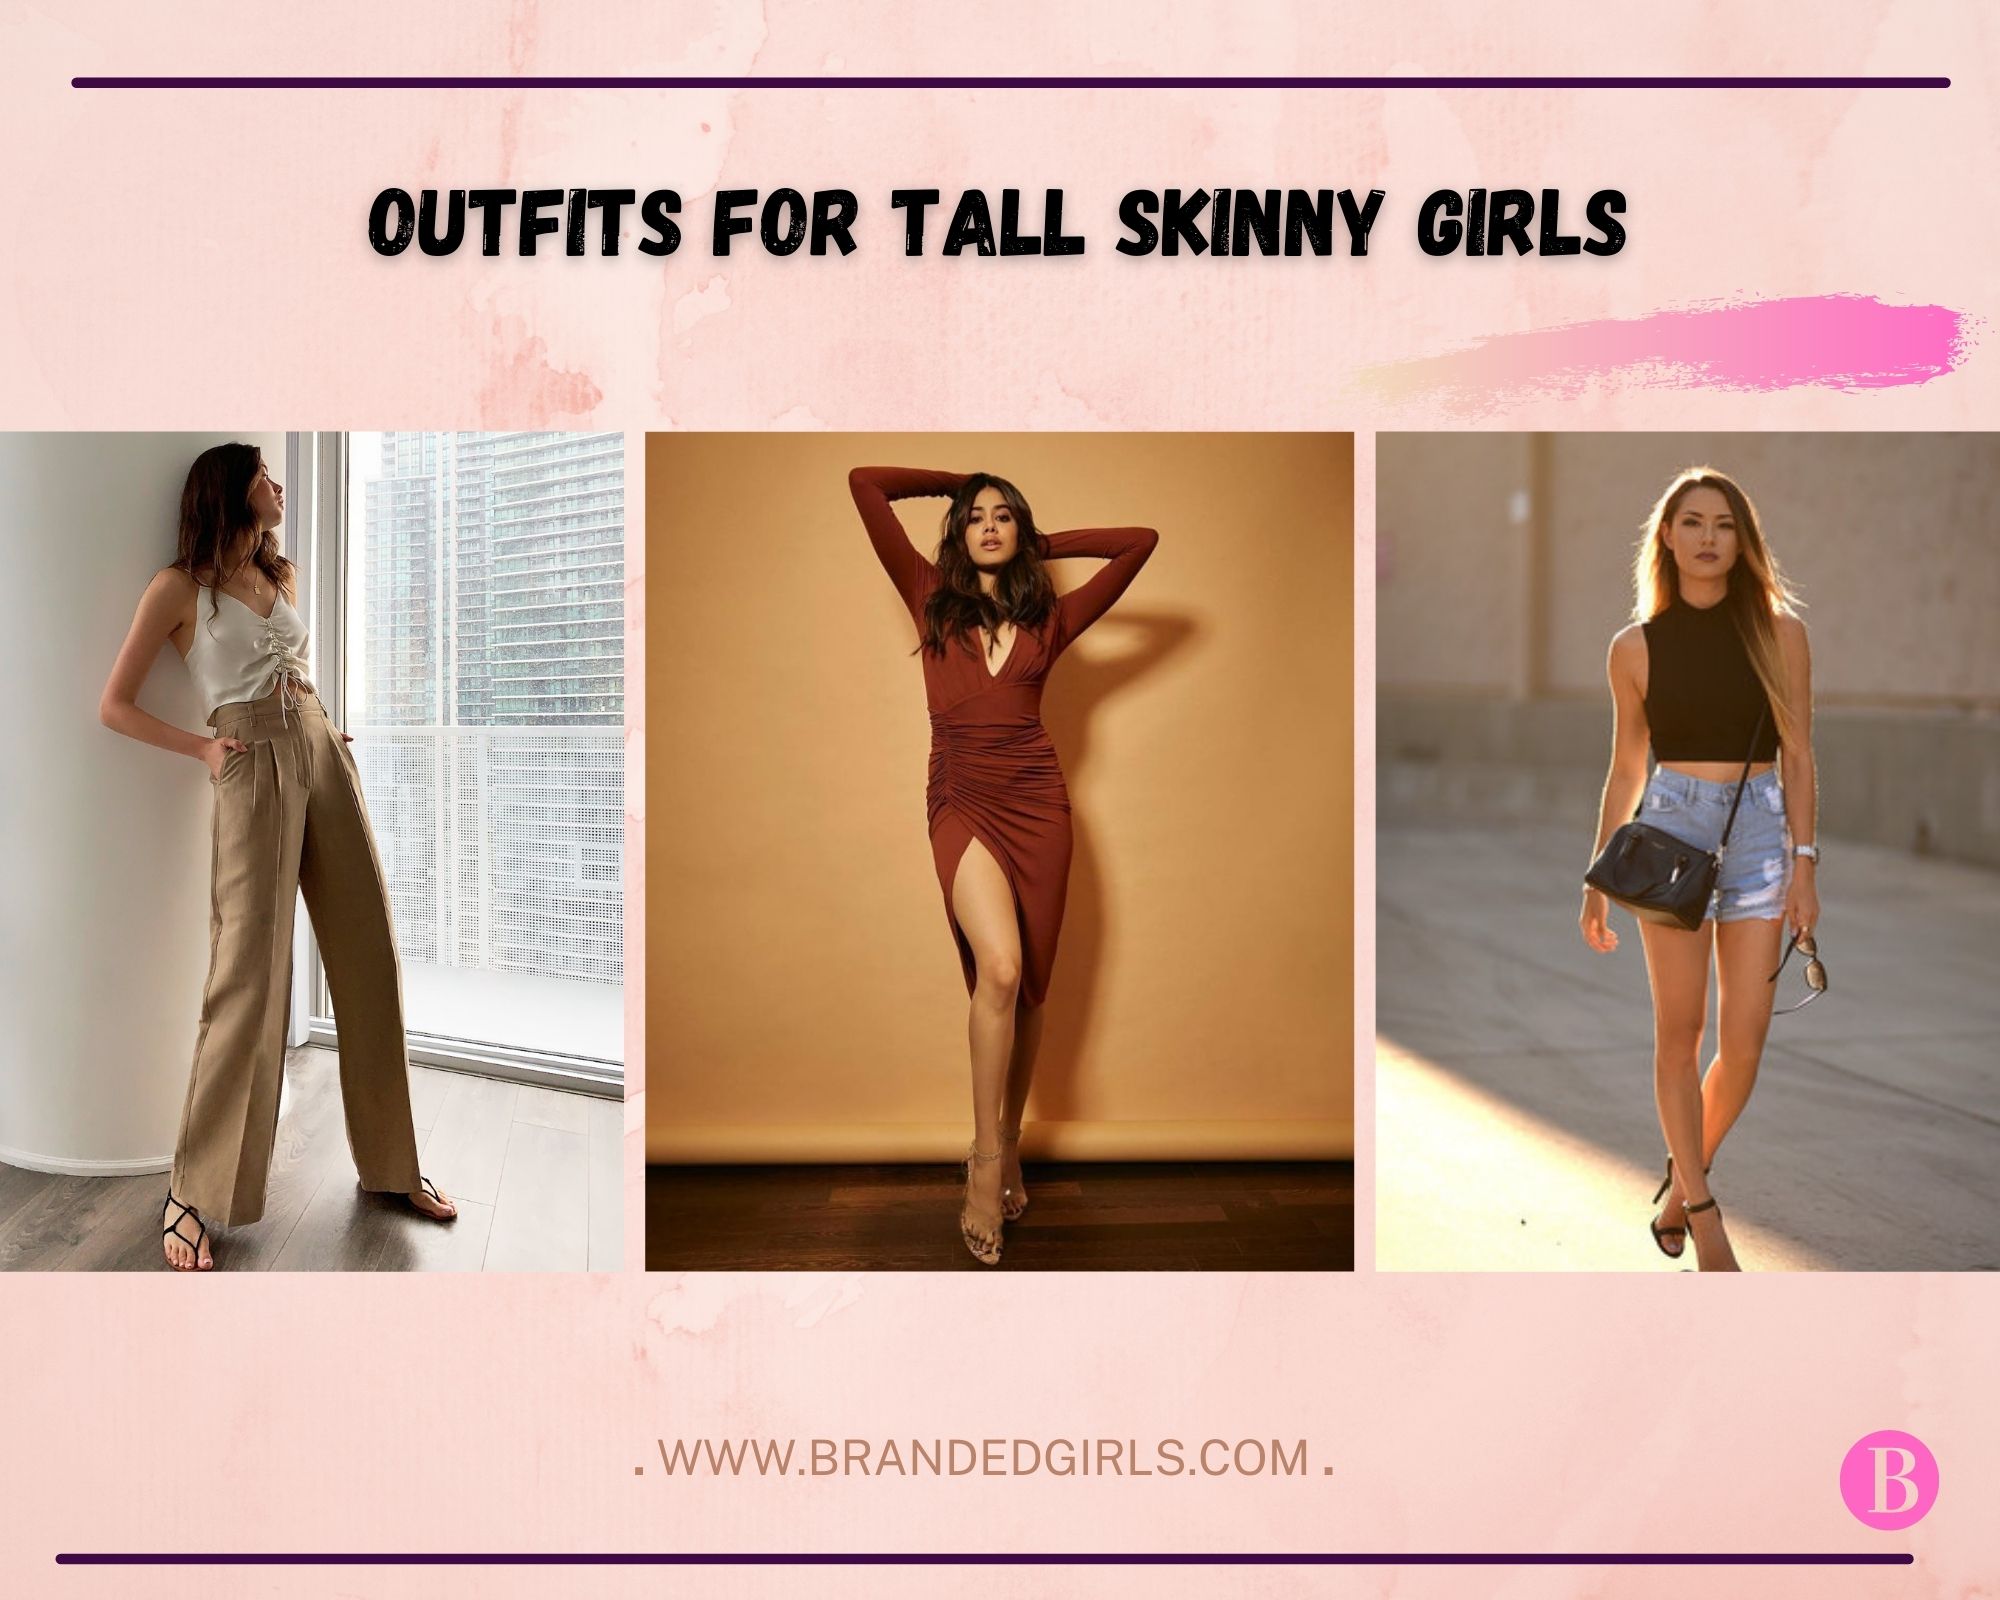 What are some tips to wearing clothes for tall and skinny people? - Quora